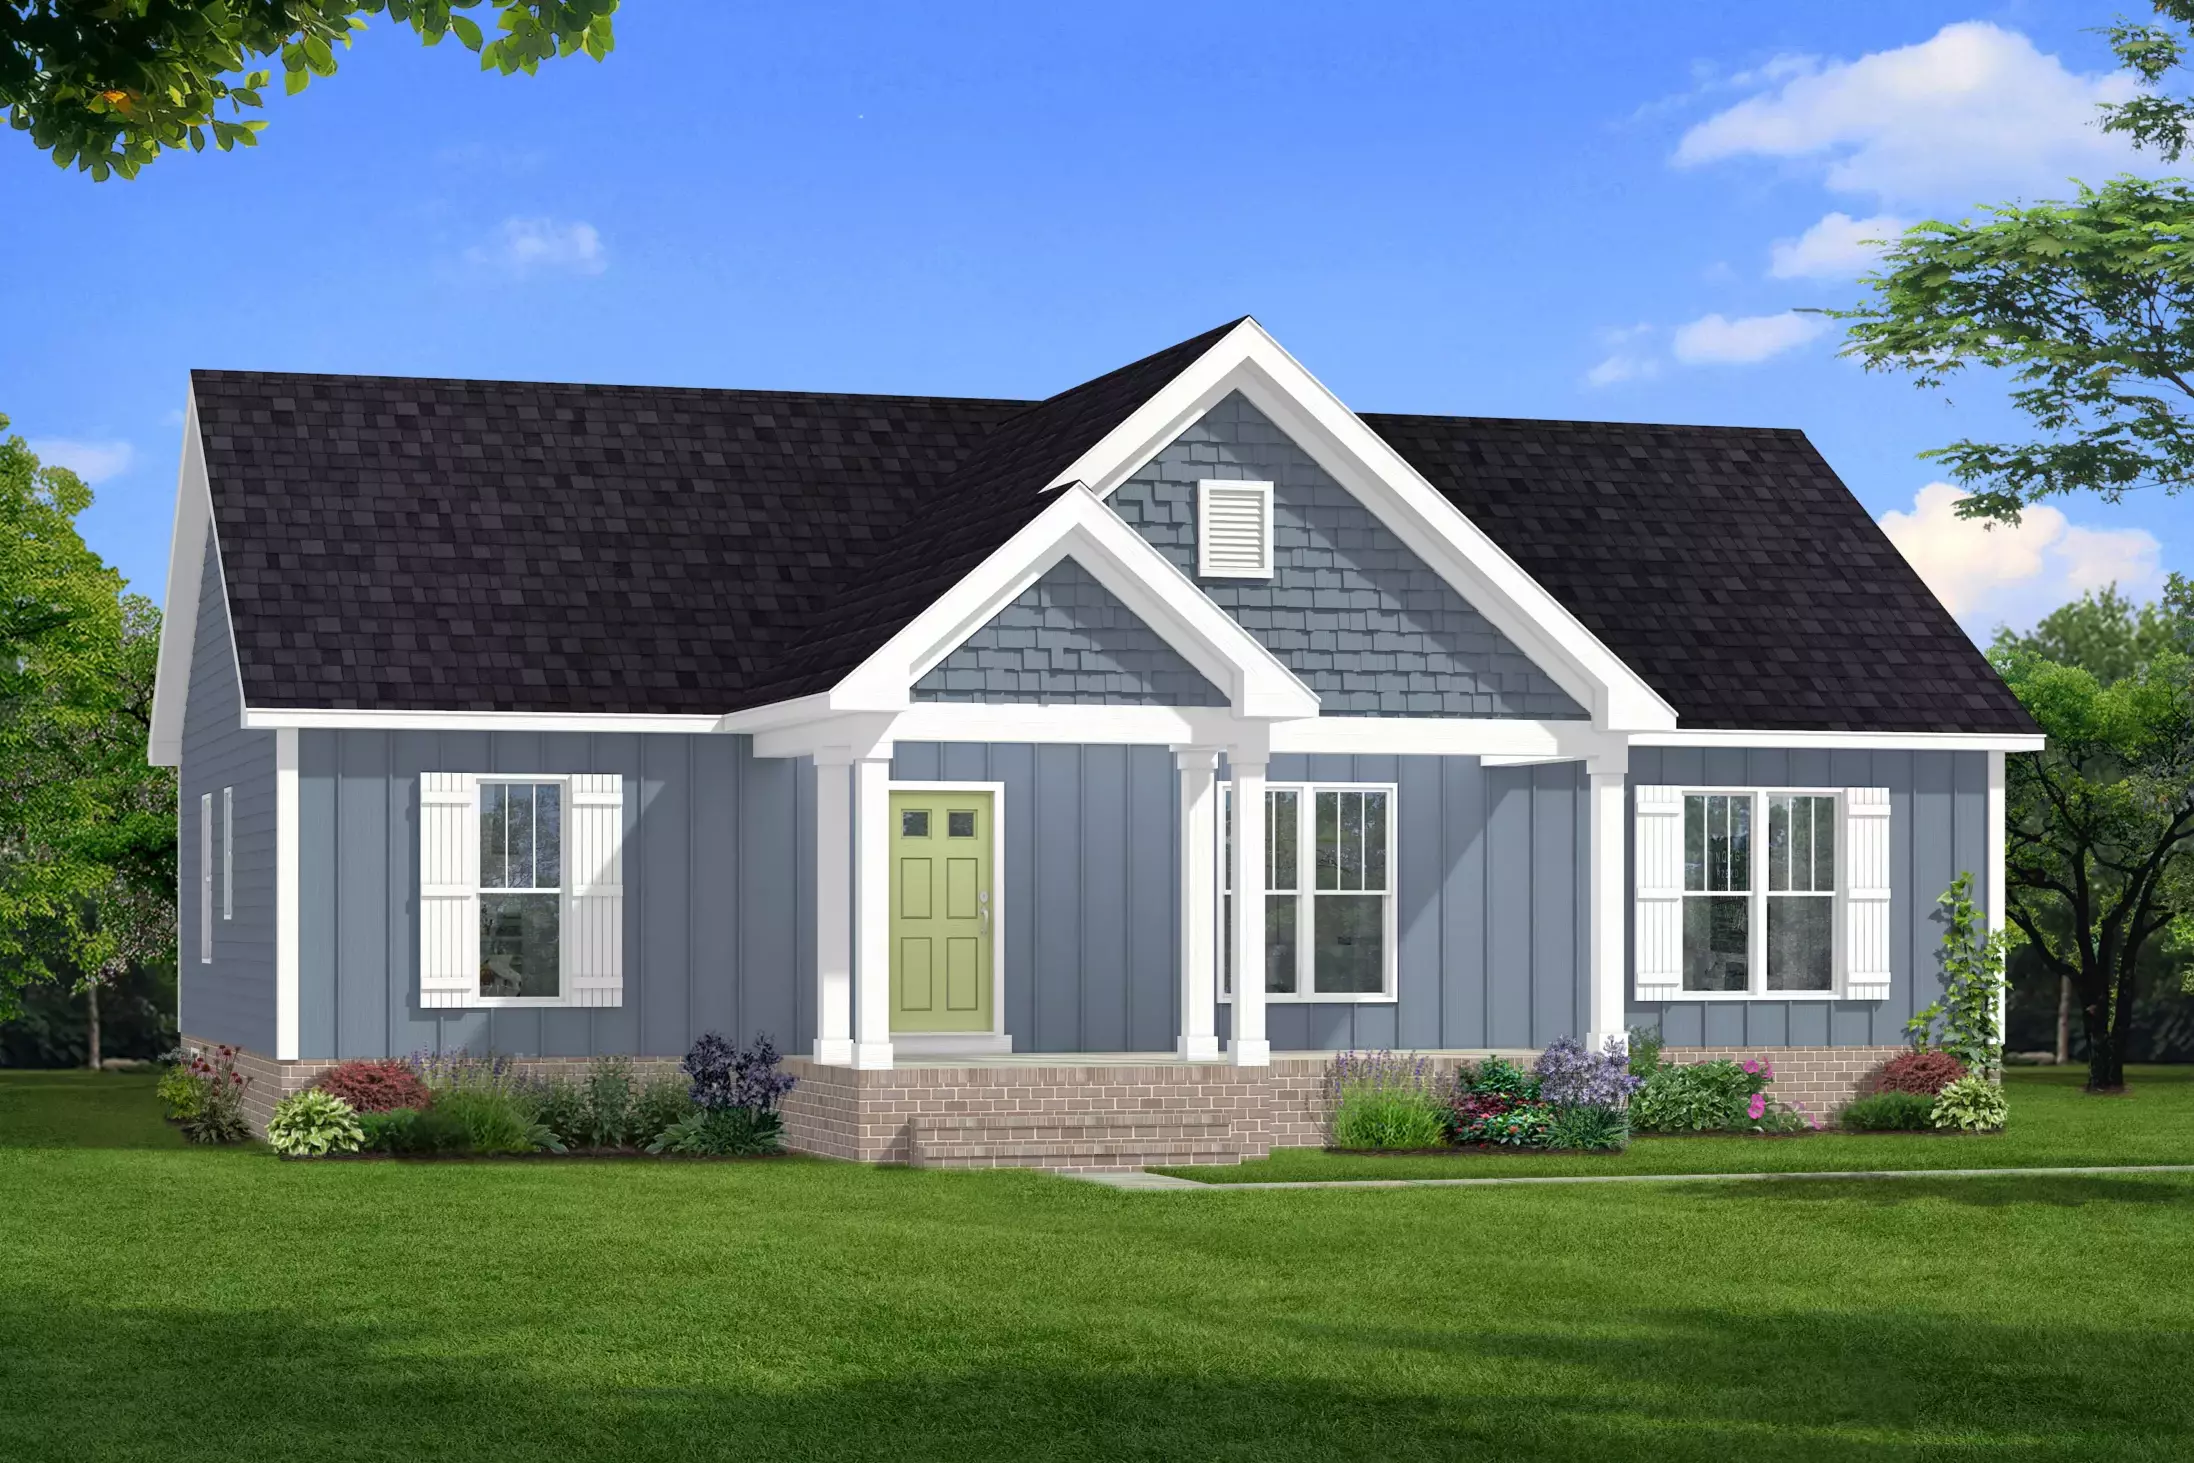 Rendering Meadow Forest Lot 1 20230512 Scaled Uai 2194x1463, Rock River Homes